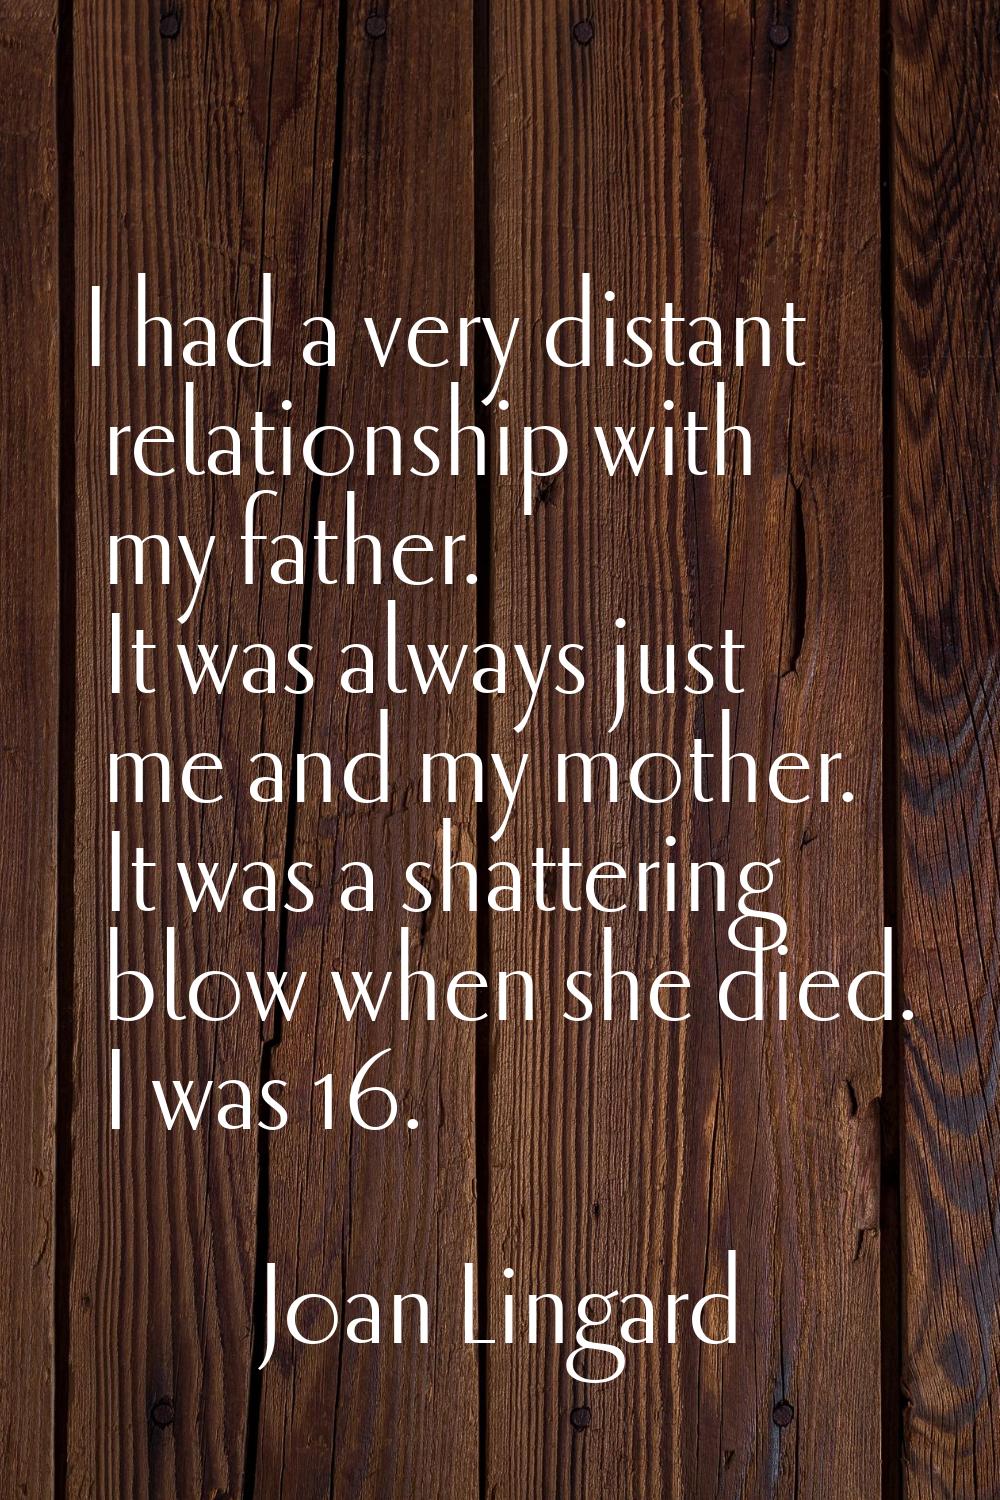 I had a very distant relationship with my father. It was always just me and my mother. It was a sha